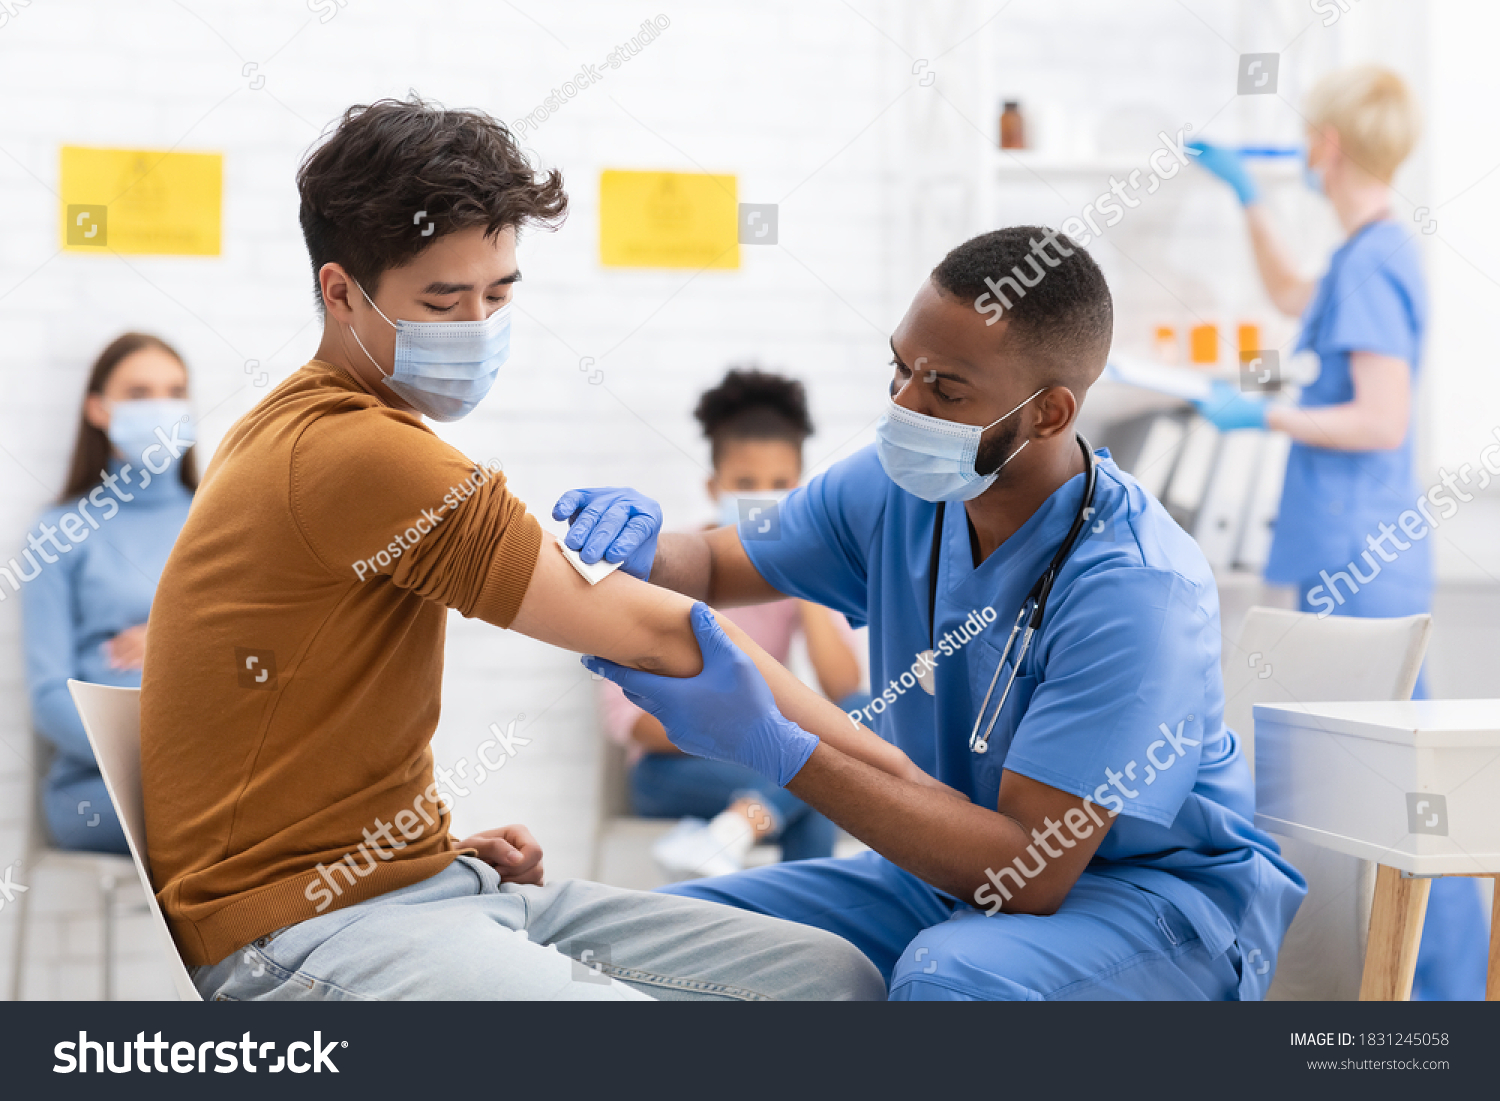 Covid-19 Vaccination. Asian Male Patient Getting Vaccinated Against Coronavirus Receiving Covid Vaccine Intramuscular Injection During Doctor's Appointment In Hospital. Corona Virus Immunization #1831245058